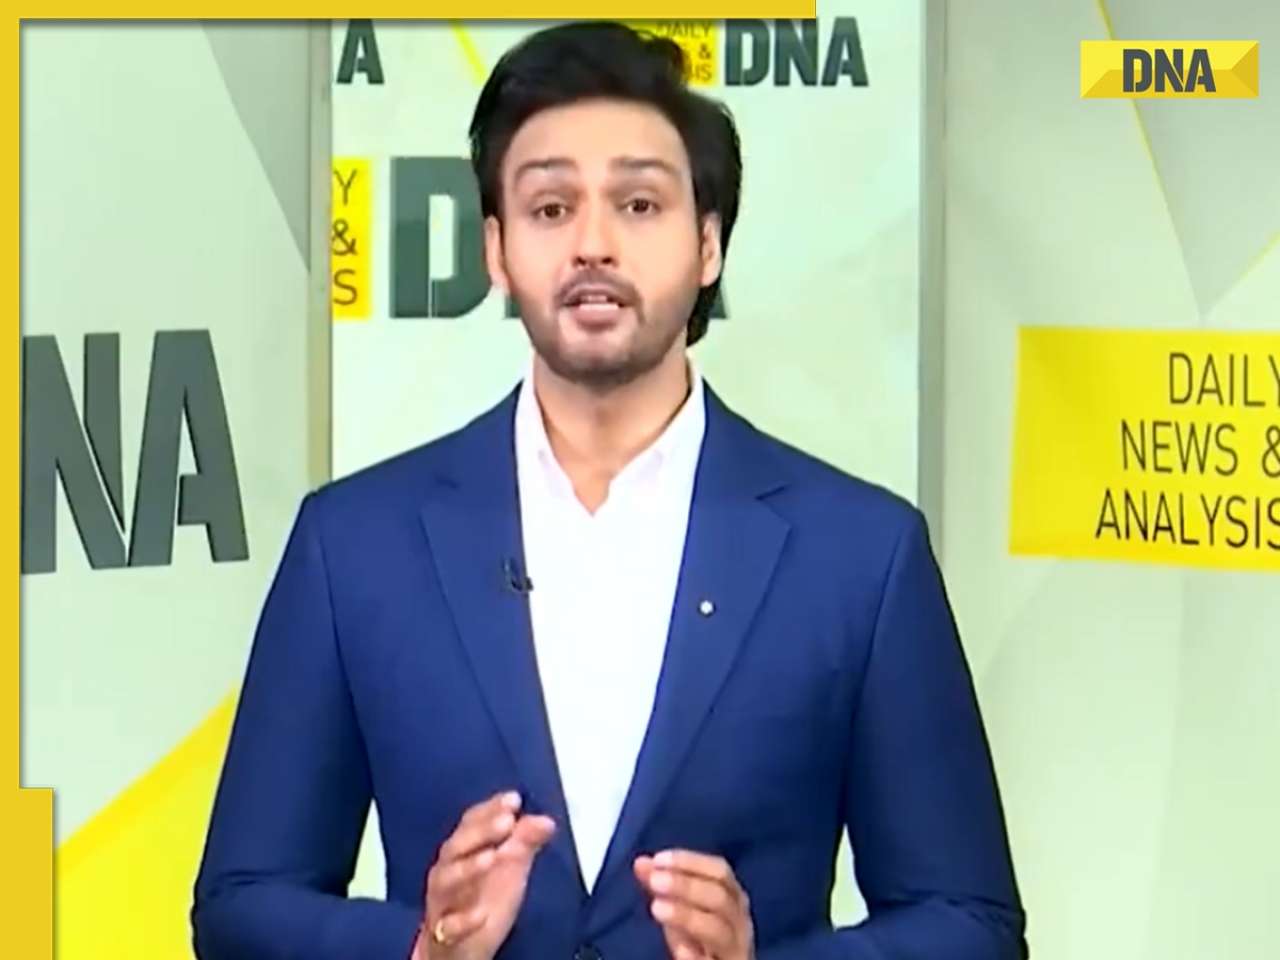 DNA TV Show: Analysis of 'profiteering policy' of private schools